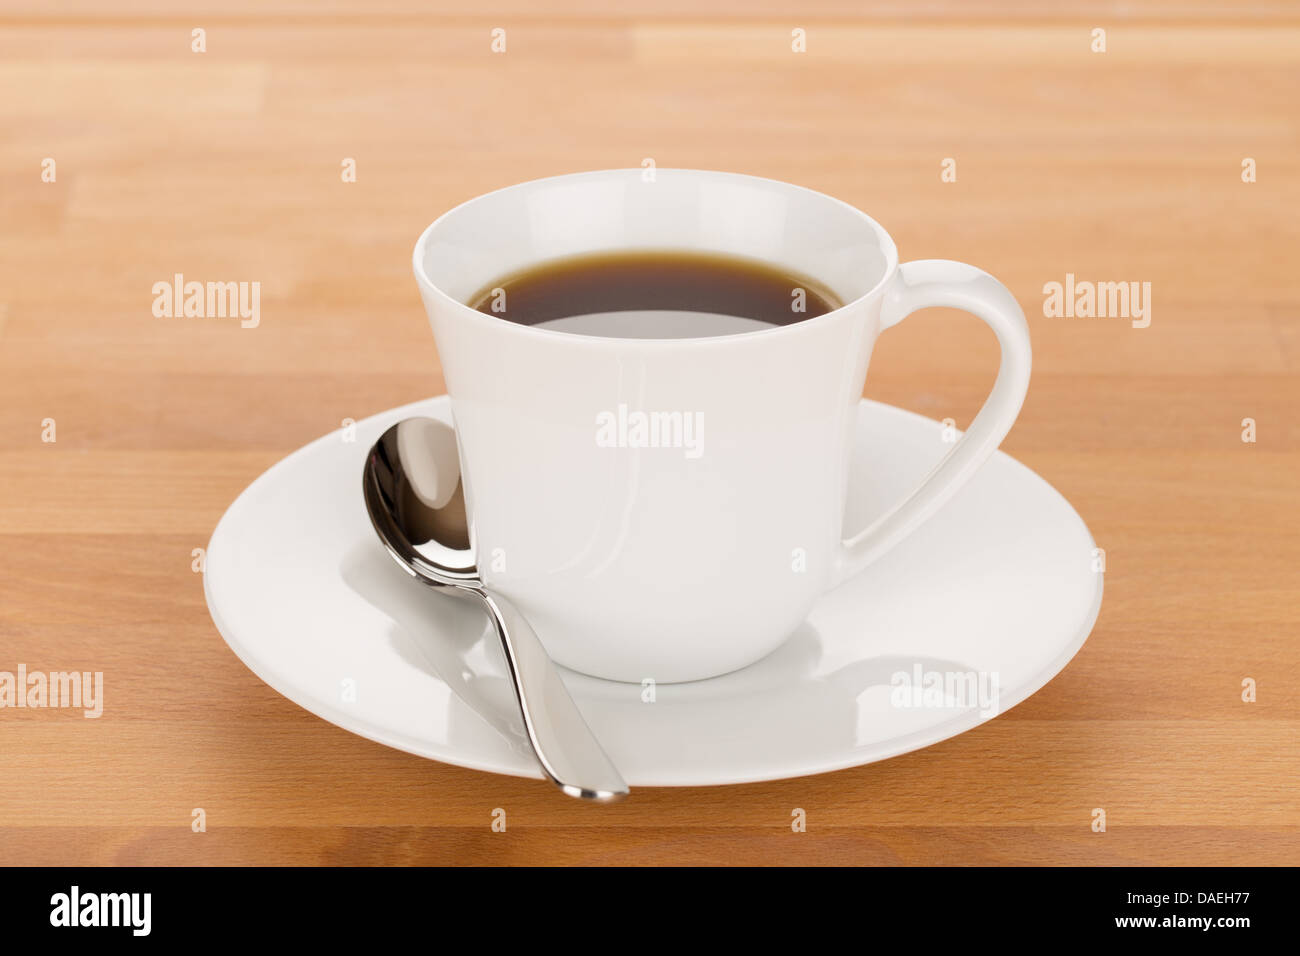 Cup of coffee and silver spoon on wooden table close up. Stock Photo